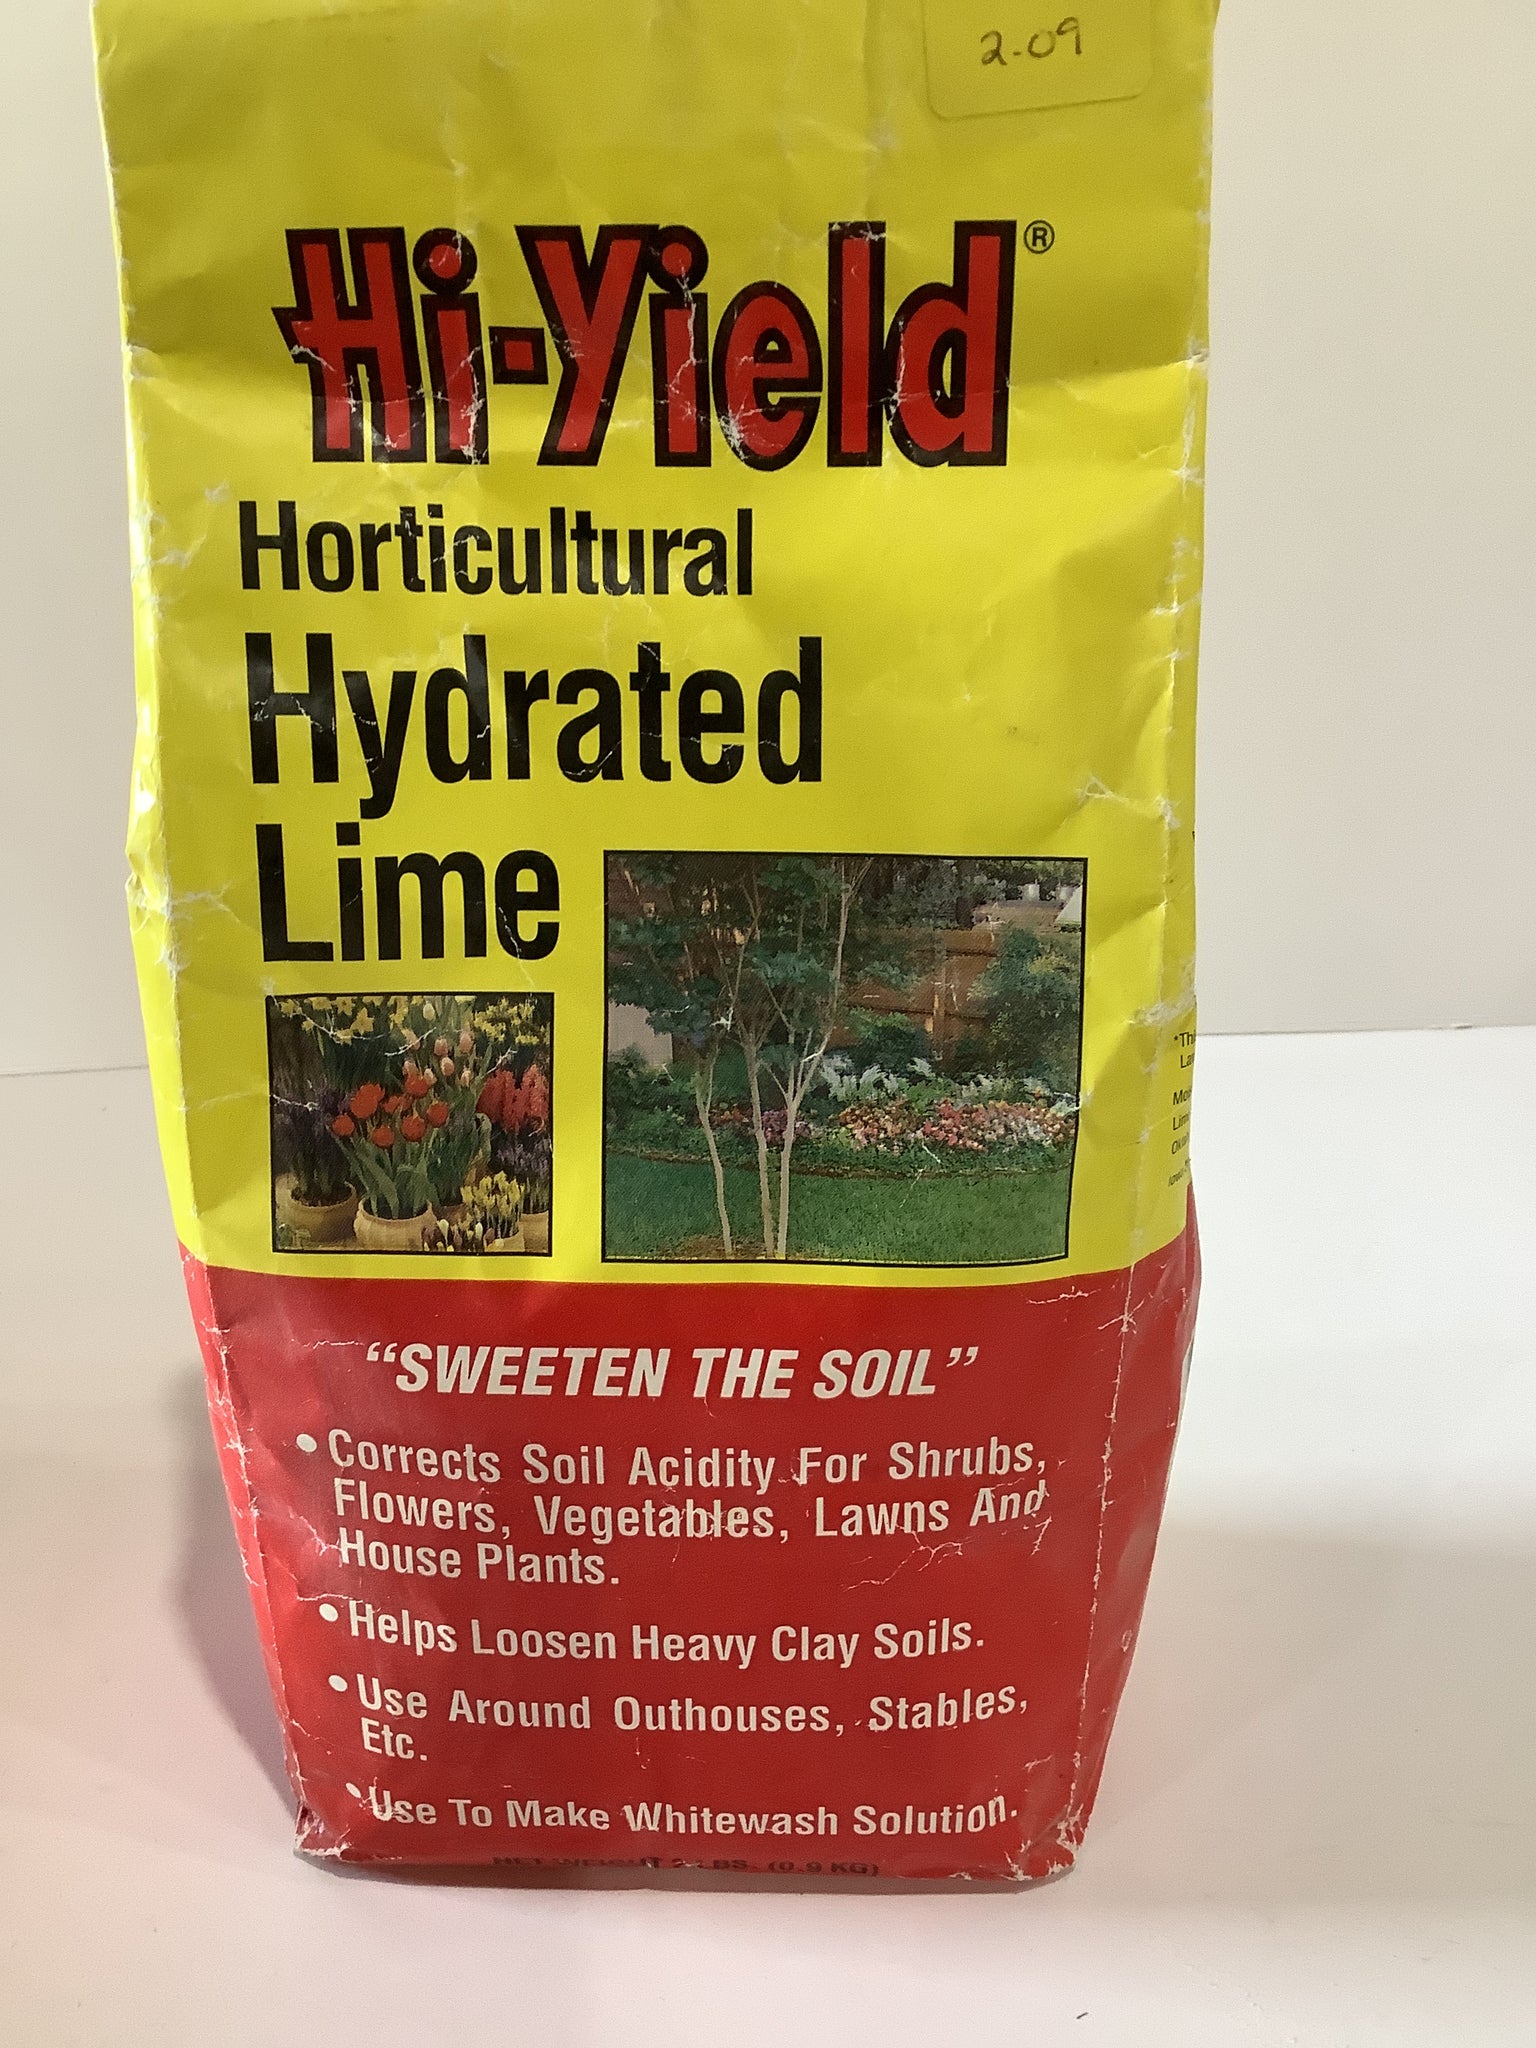 Hydrated lime